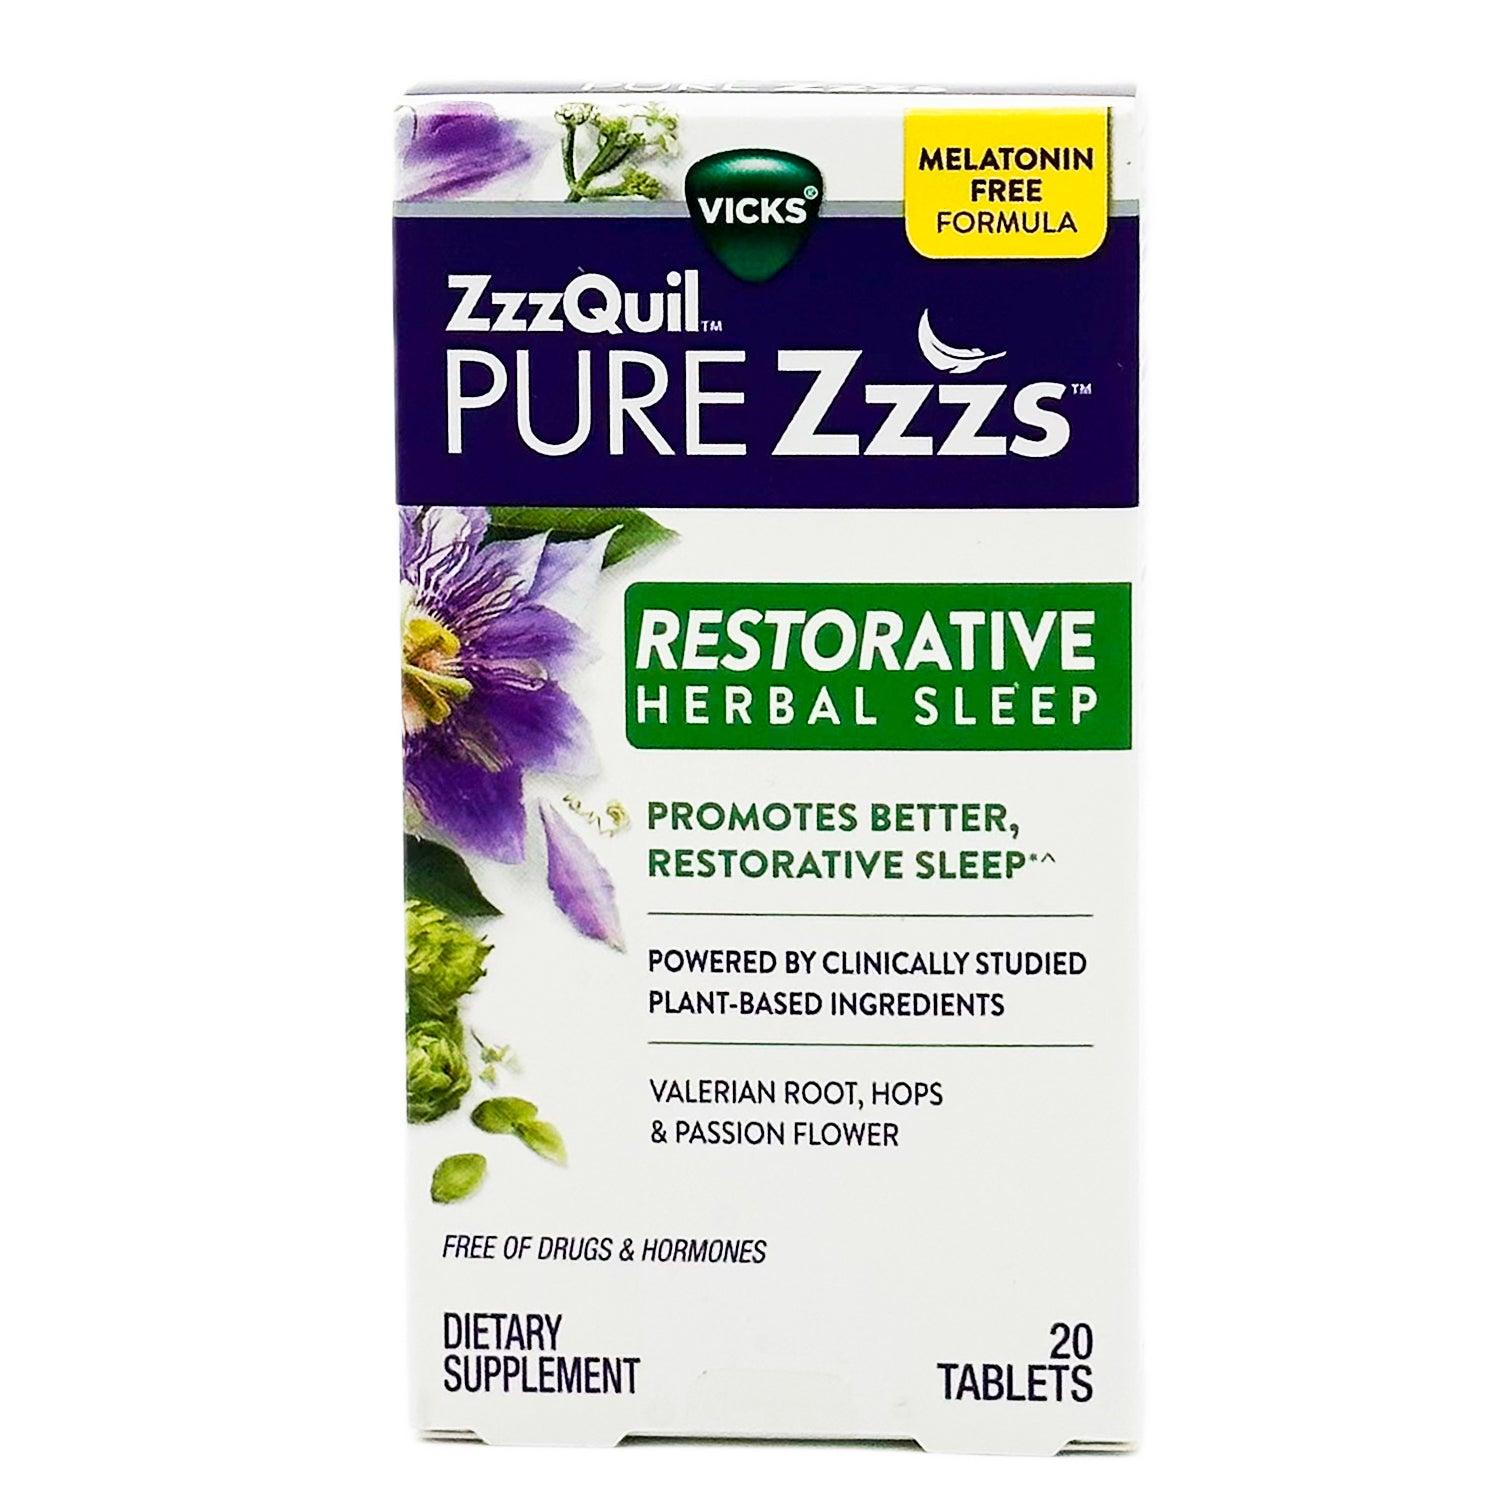 vick's | pure zzzs restorative herbal sleep | 20 tablets | BEST BY 04/22 - Home Revival Shop